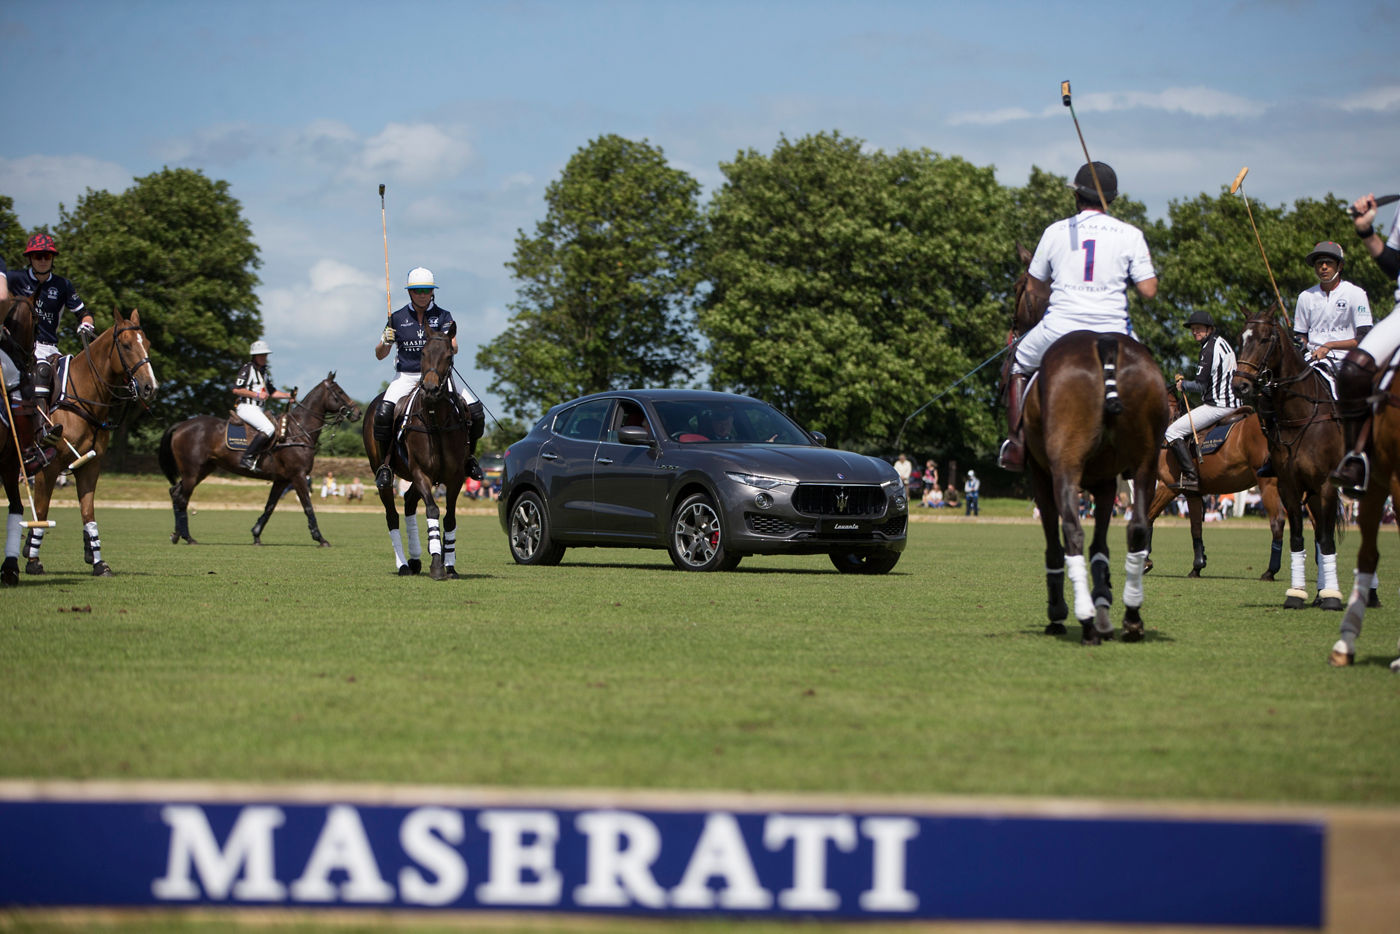 Maserati-Royal-Charity-Polo-Tour-2017---Beaufort-Polo-Club---Levante-at-start-of-play (1)